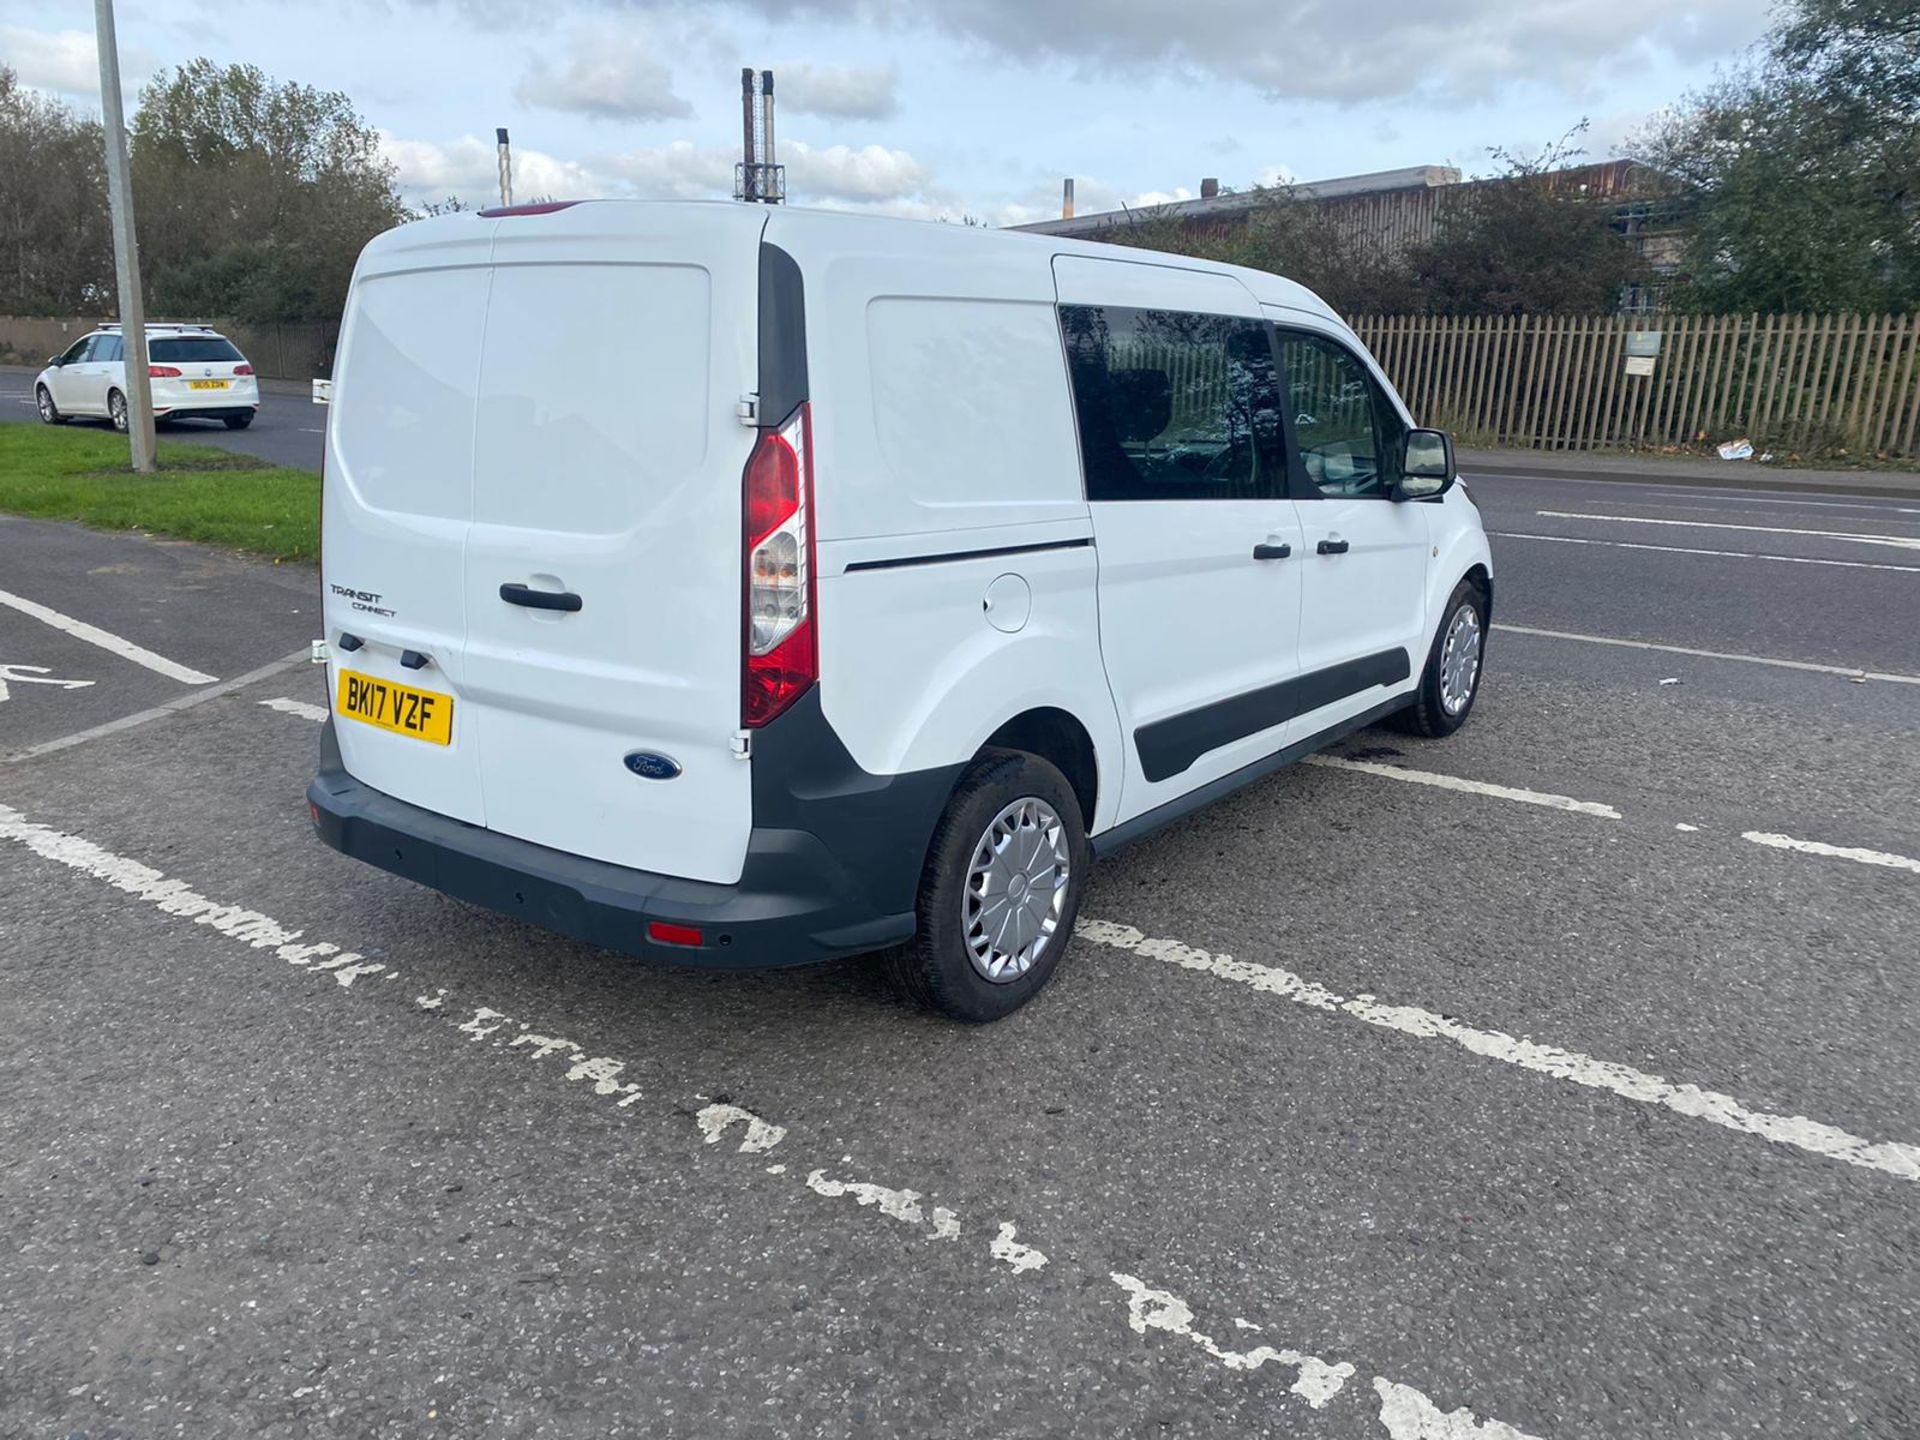 2017 17 FORD TRANSIT CONNECT DOUBLE CAB PANEL VAN - 118K MILES - 5 SEATS - LWB - EURO 6. - Image 7 of 11